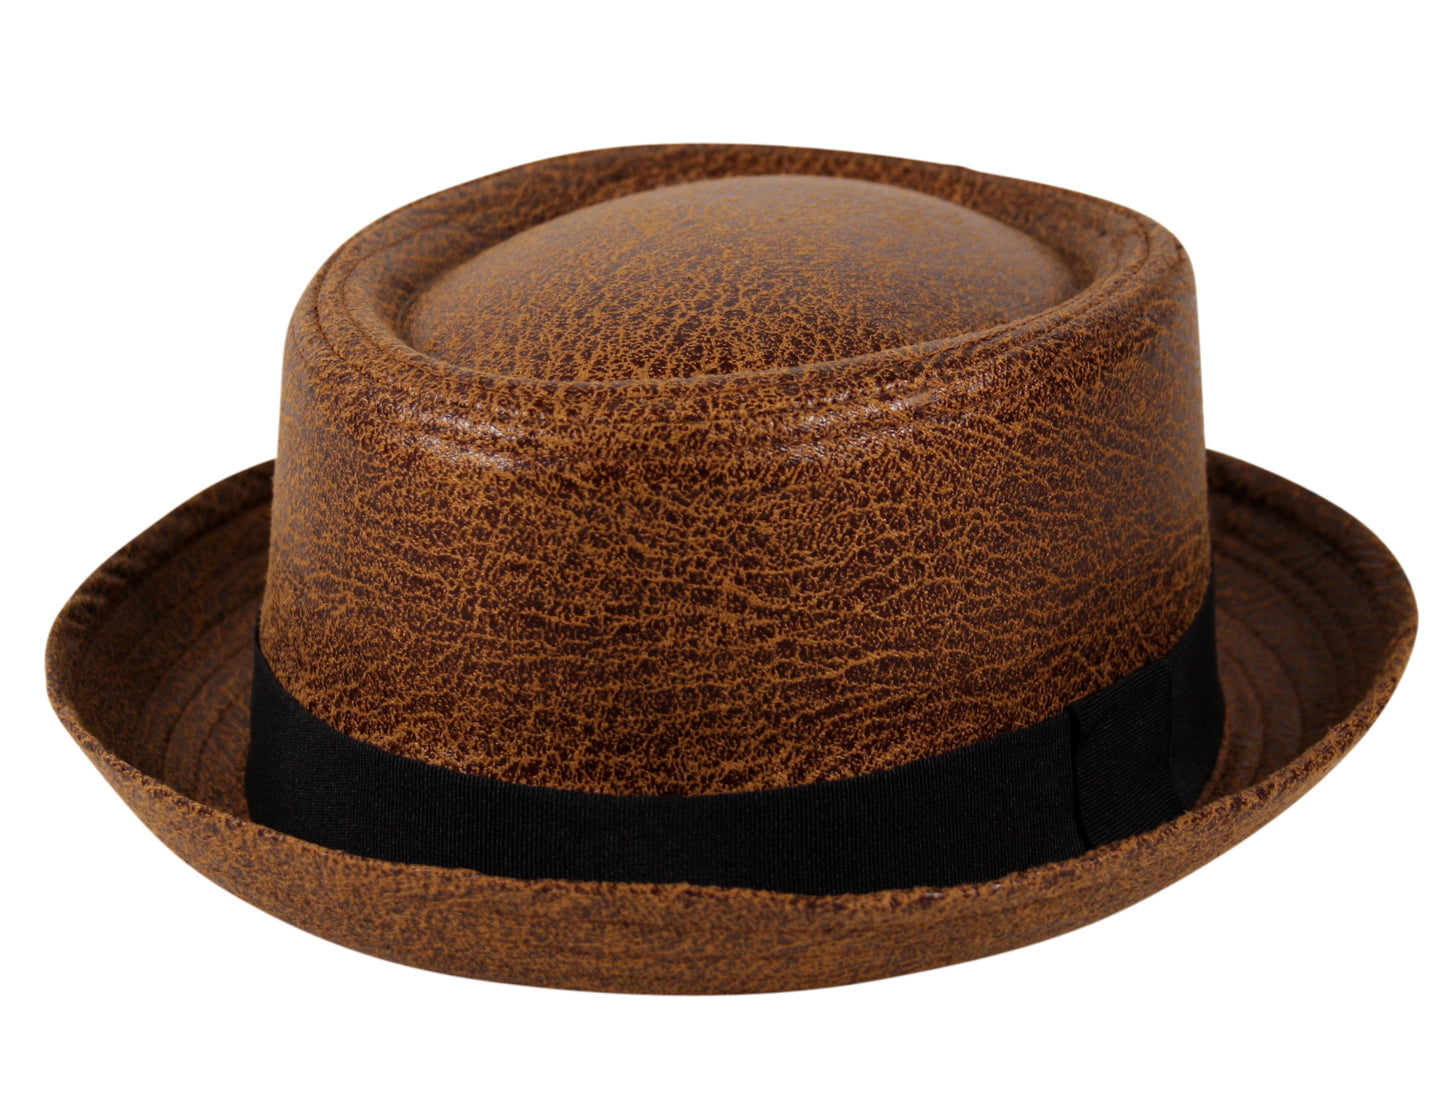 Textured Faux Leather Pork Pie Hat in Tan Brown